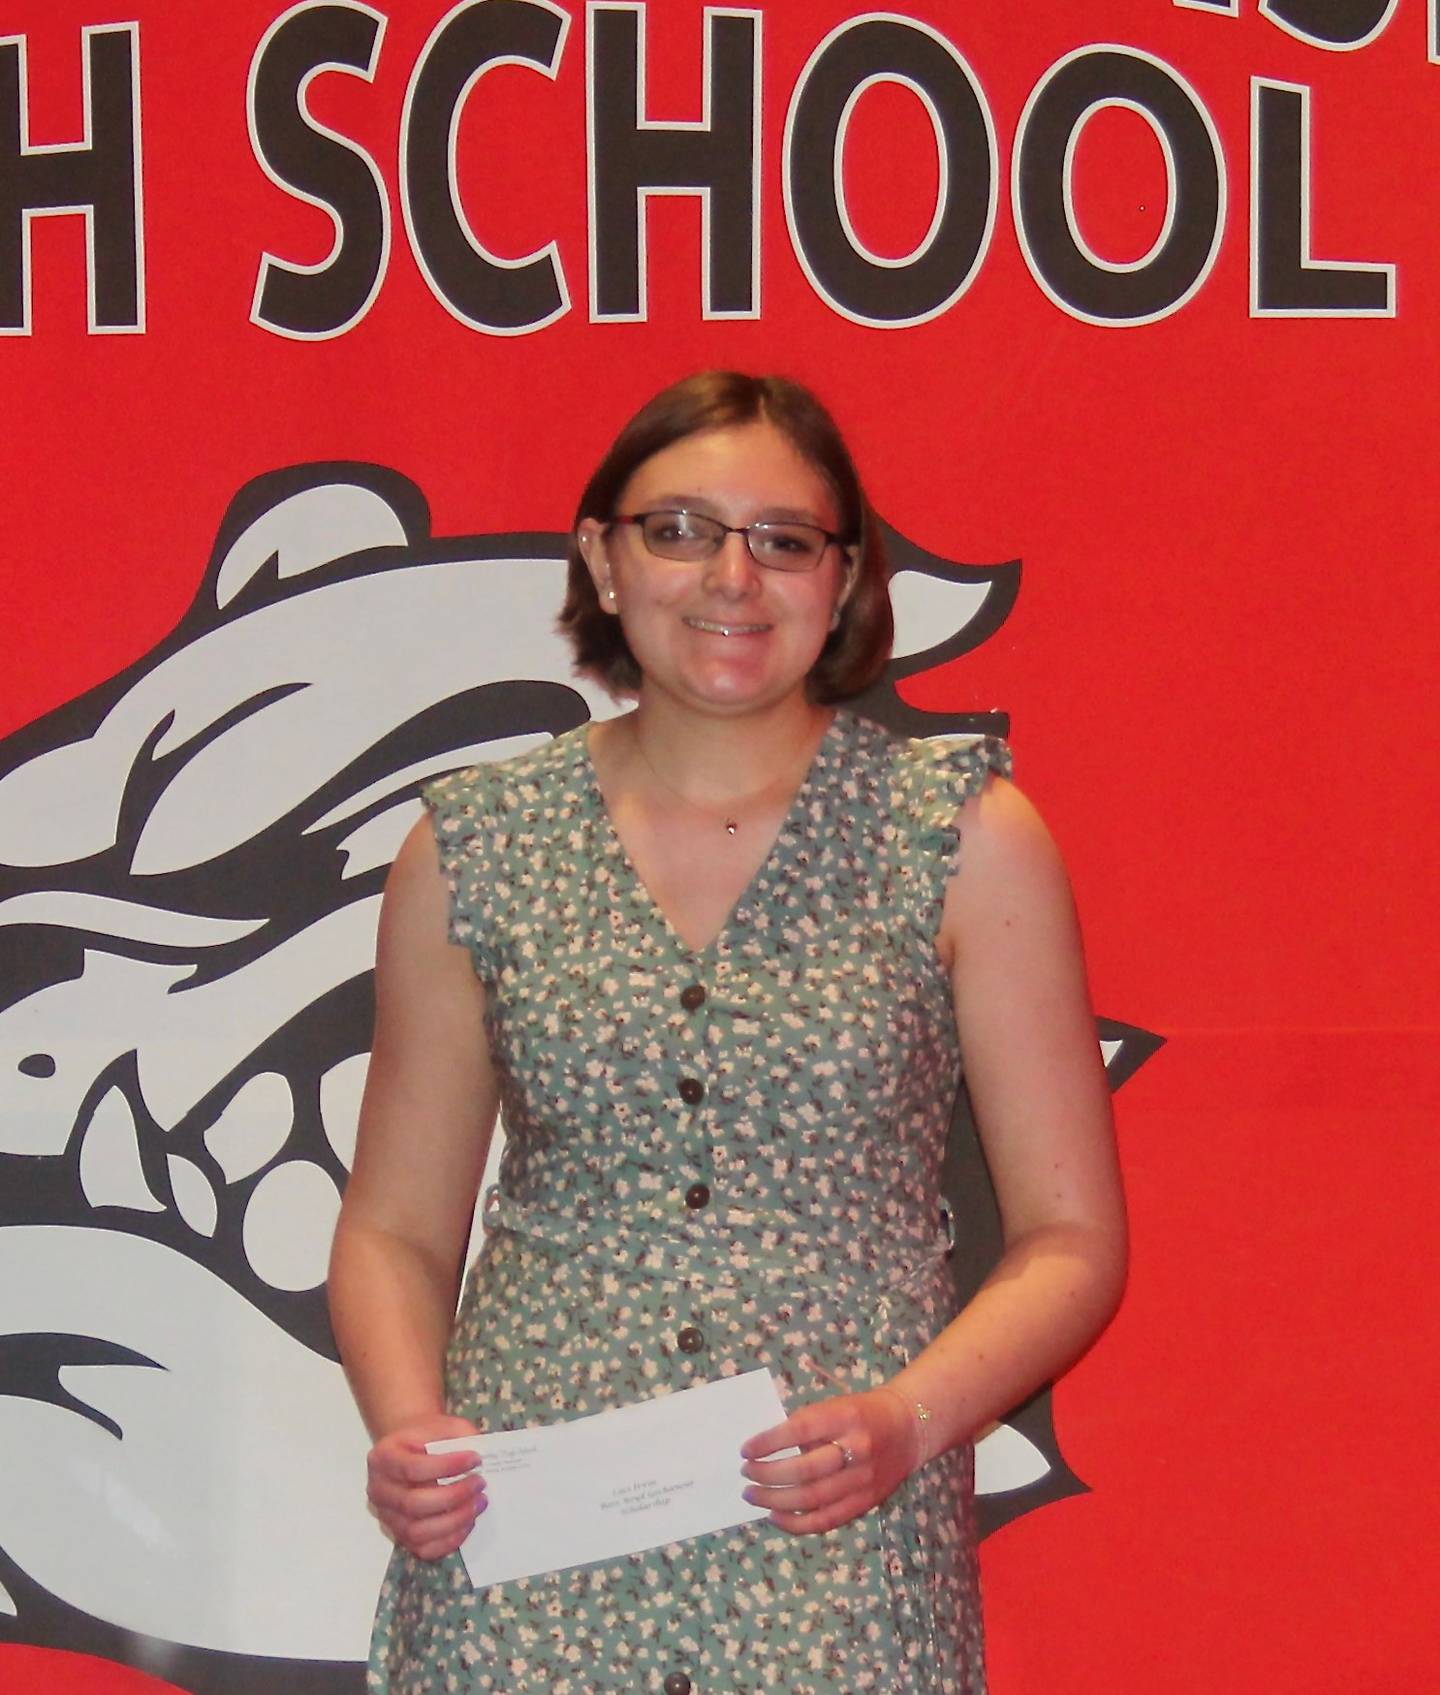 Streator High School's Laci Irvin was the Rose Boyd Gochanour Scholarship recipient of $5,000 for each of her four years of college for a $20,000 total award.